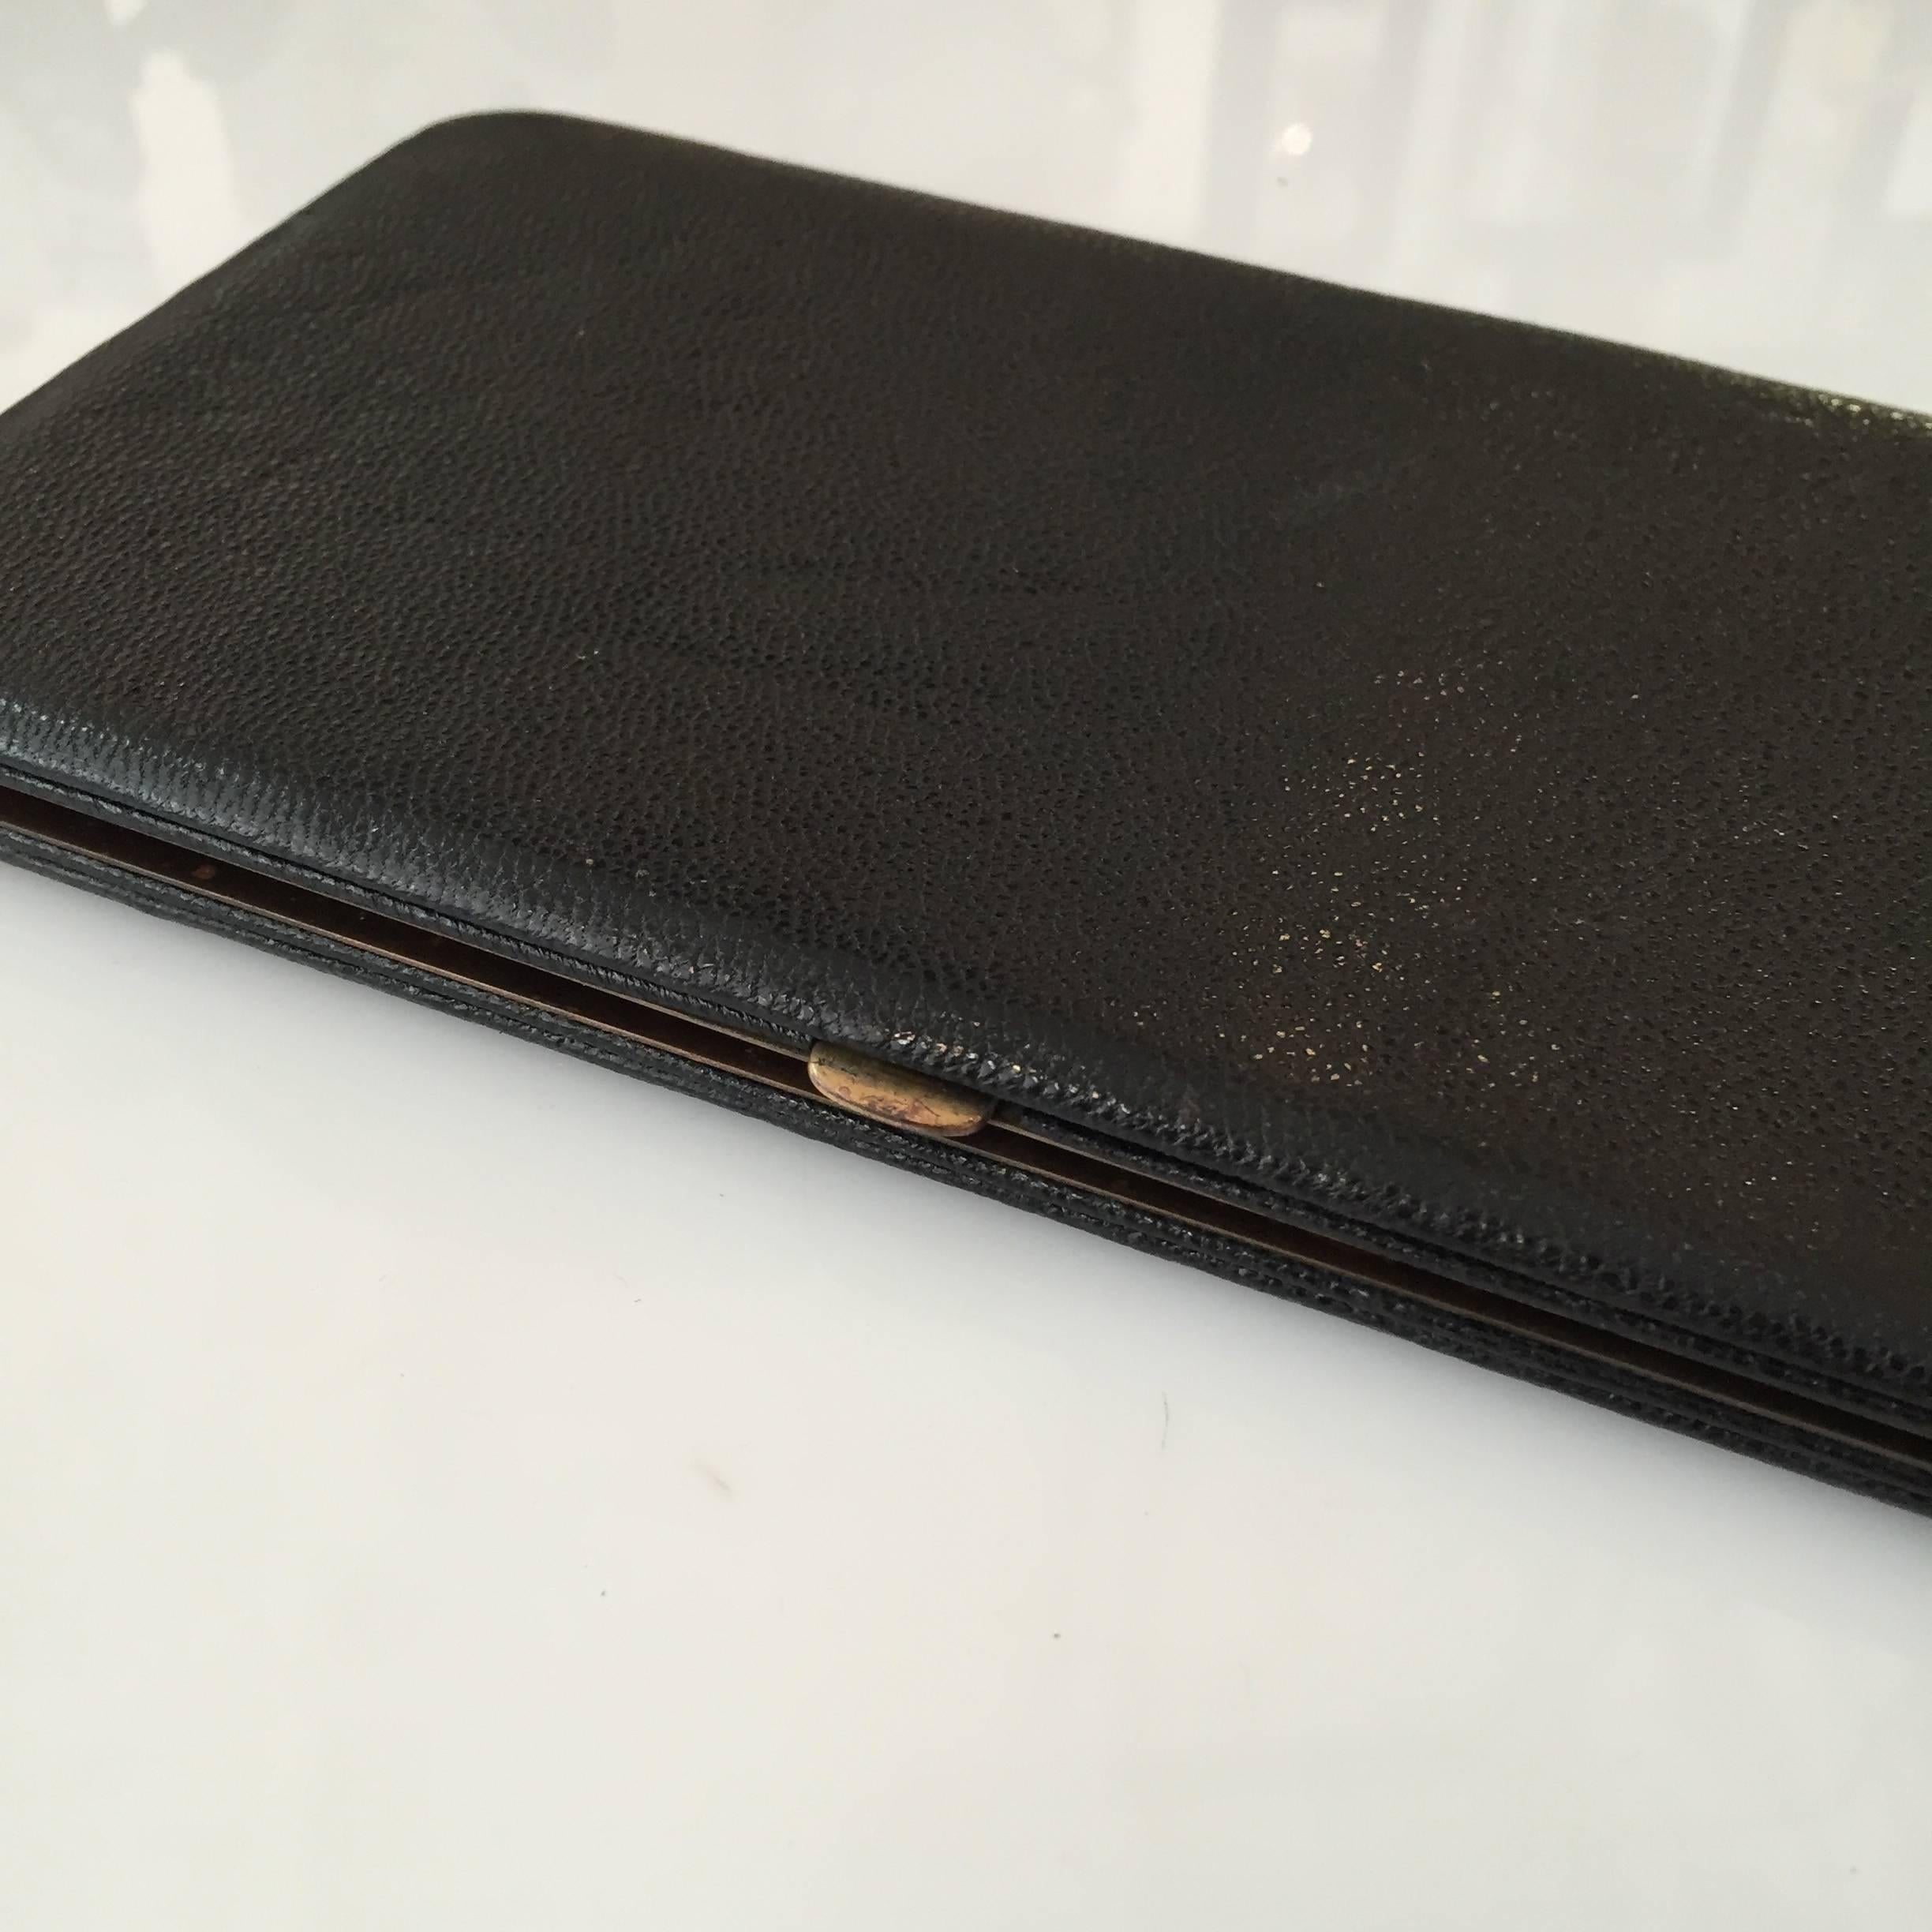 Leather Dunhill Cigarette case in a pocket book style.

4